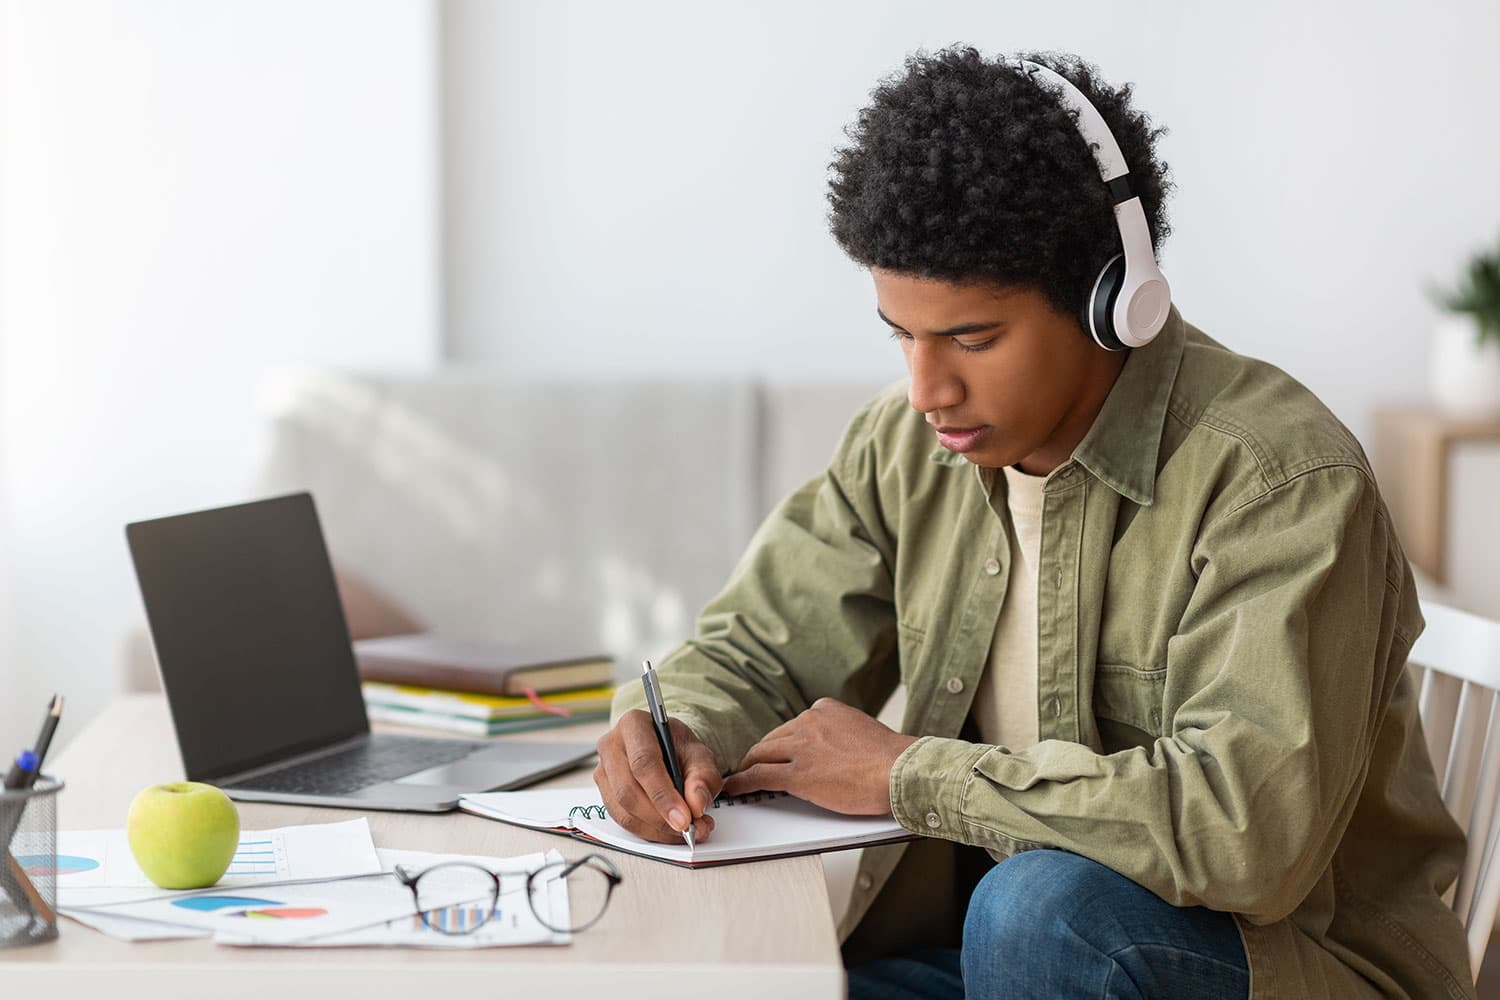 Image of a black male student studying with headphones